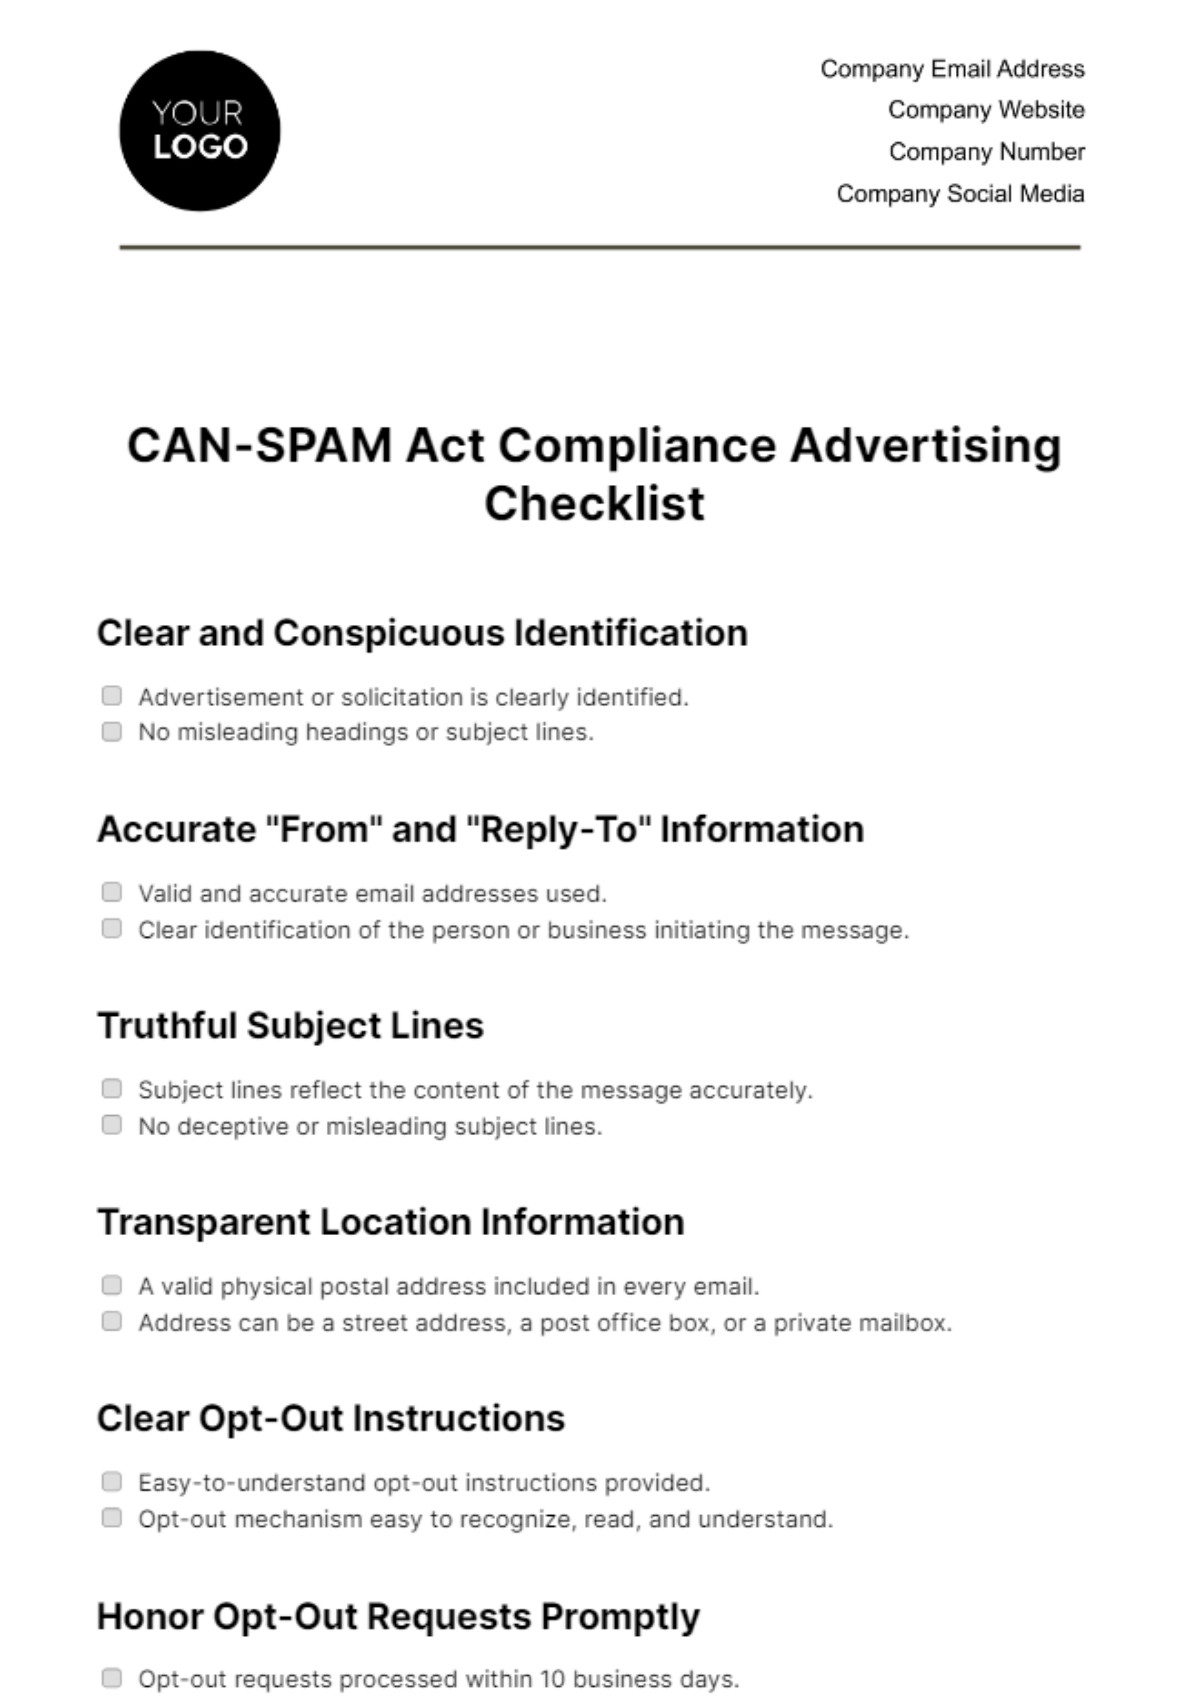 Free CAN-SPAM Act Compliance Advertising Checklist Template